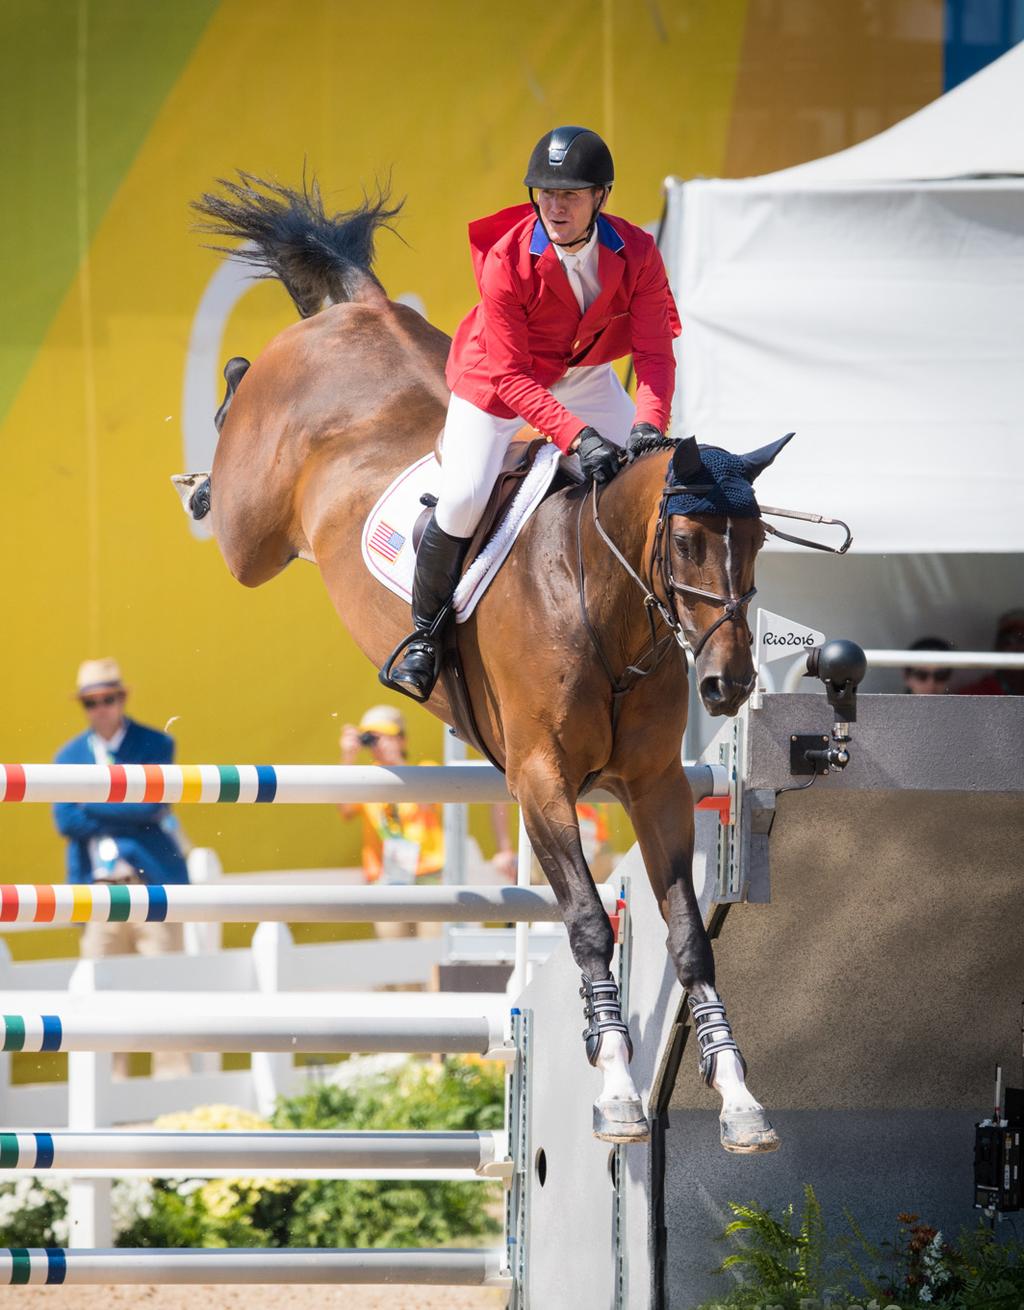 USEF Competition Name: St. Christopher's USEF#: 271 Competition Division(s) and Rating(s): Premier (AA) Hunter 4* Jumper DISCOVER THE at USequestrian.